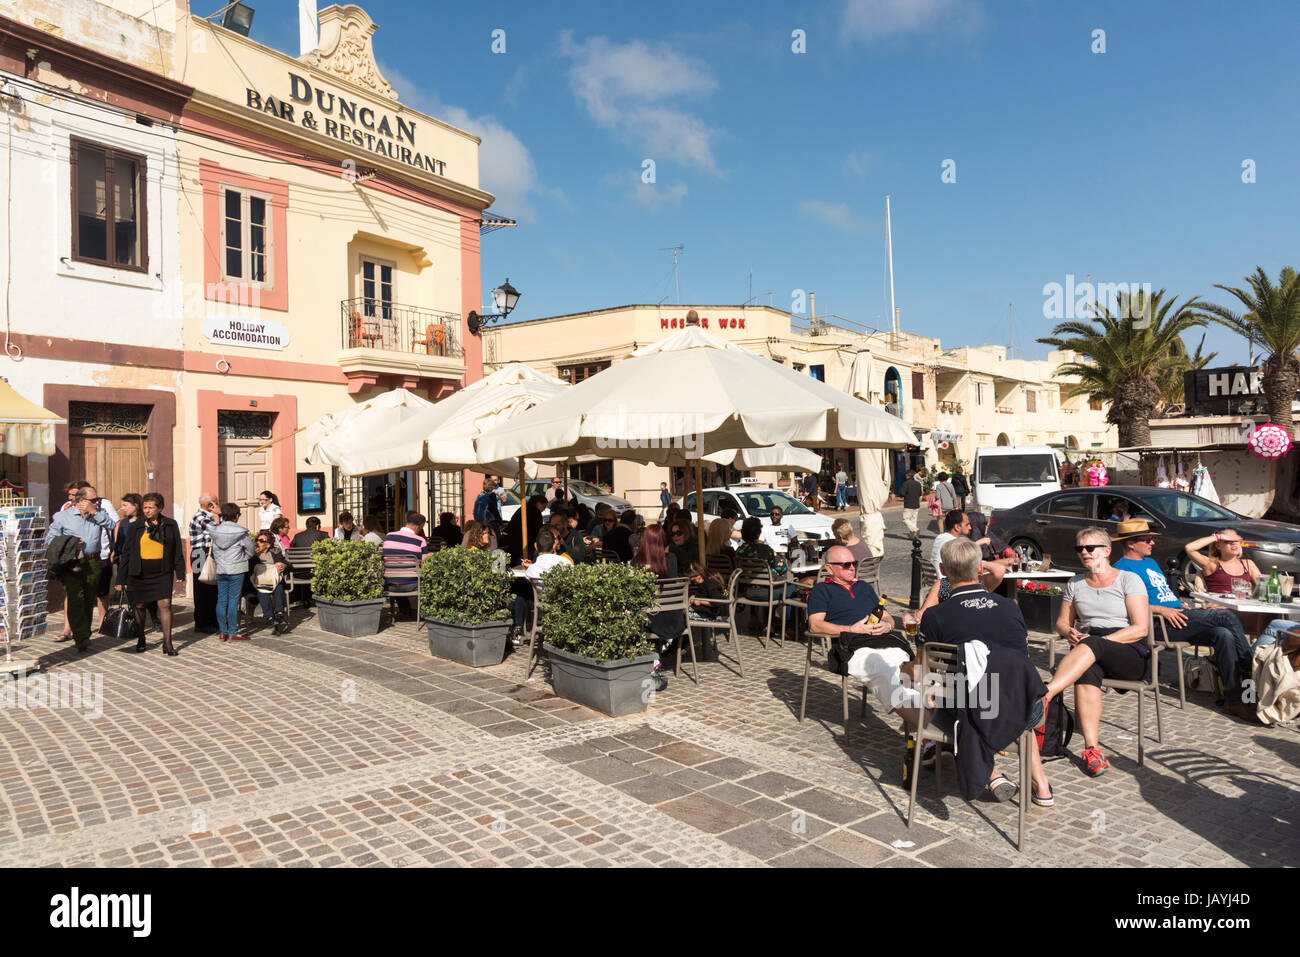 People sitting outside at tables and chairs outside the Duncan bar and restaurant at Marsaxlokk Malta enjoying the sun al fresco Stock Photo